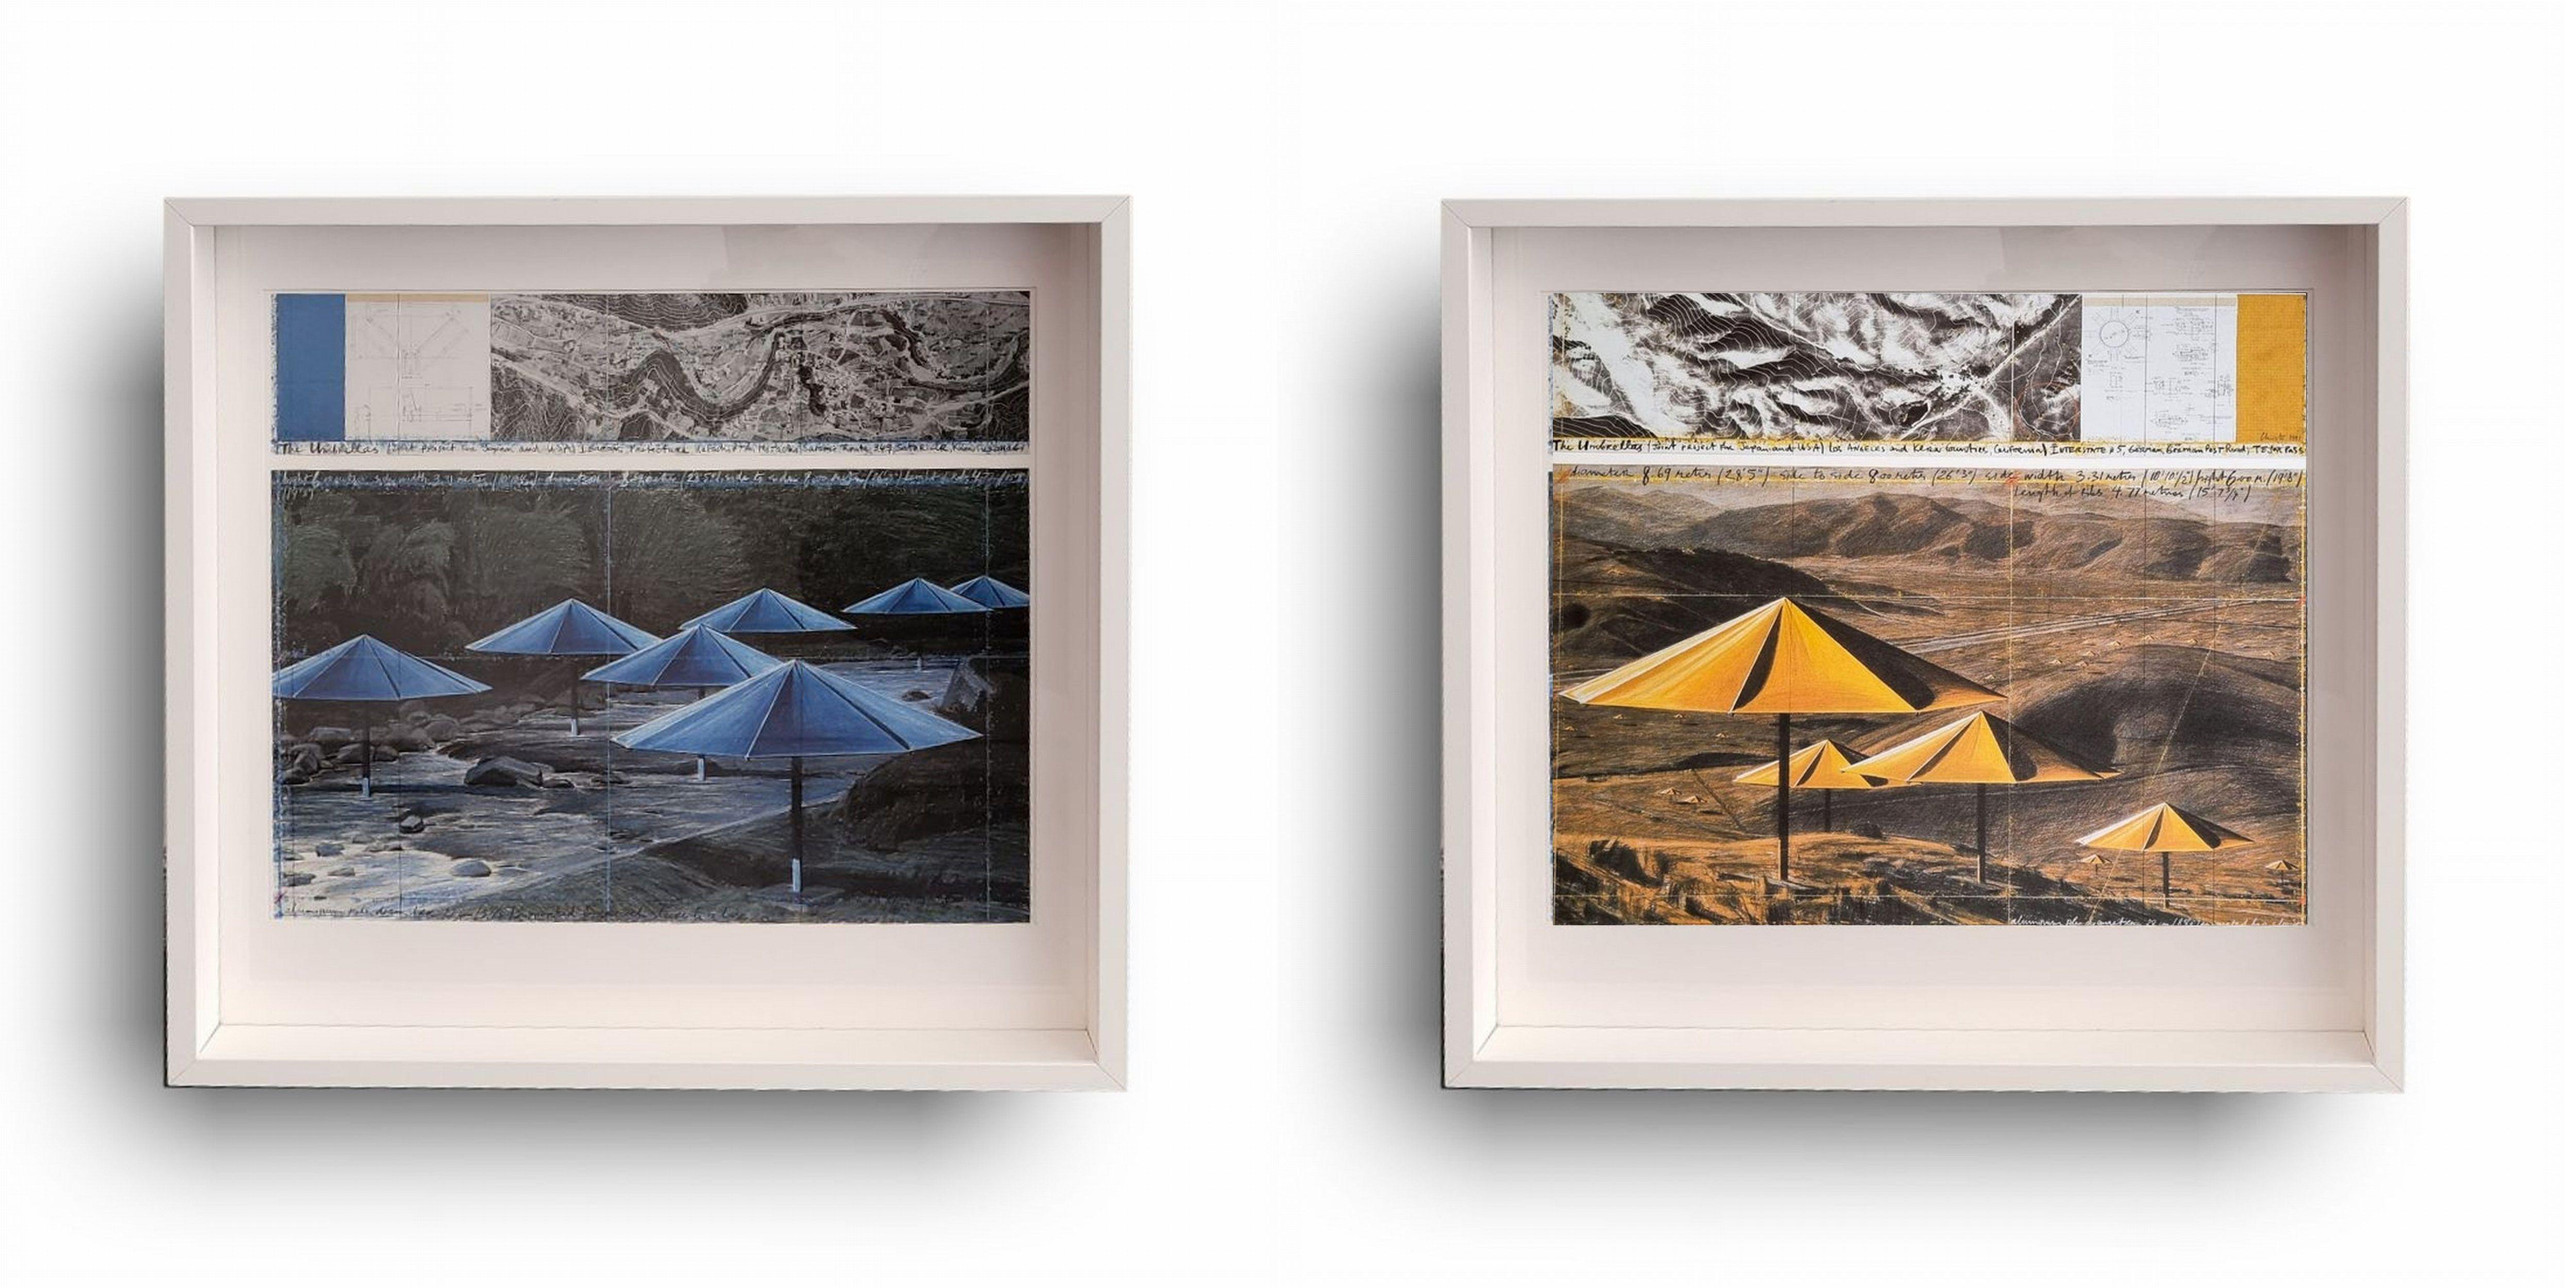 The Umbrellas (Yellow & Blue  FRAMED) - Print by Christo and Jeanne-Claude